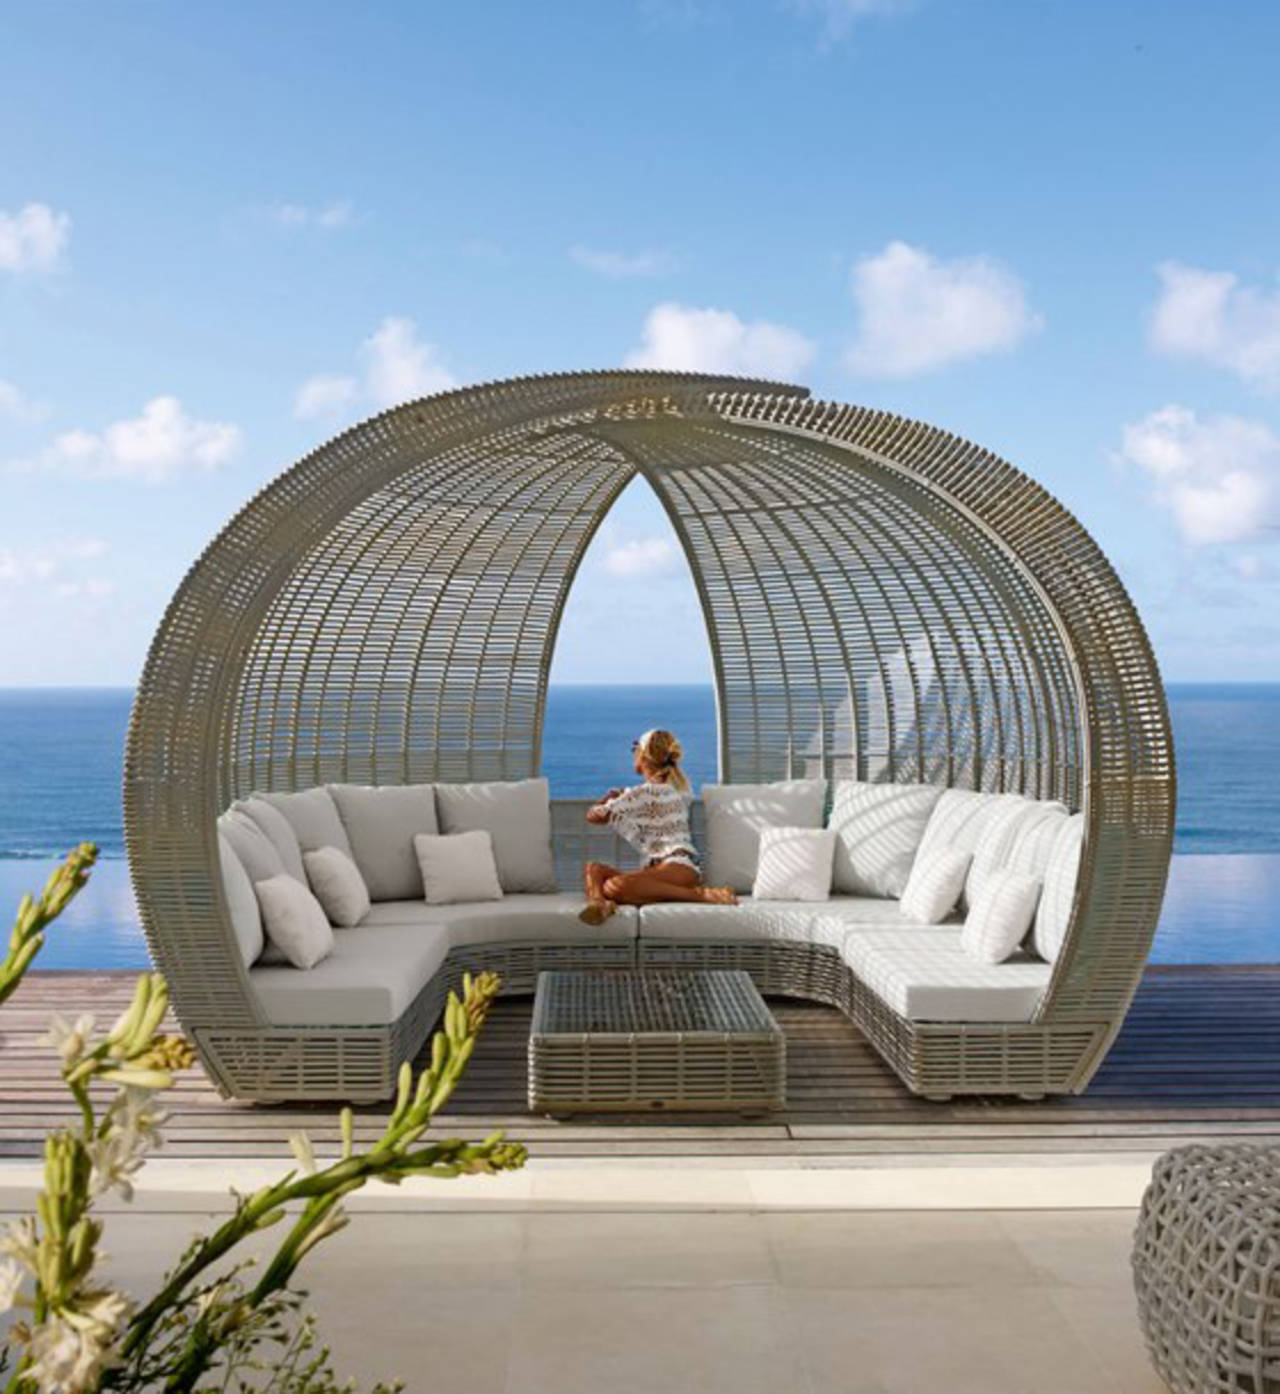 Series Of Luxury Outdoor Furniture By Skyline Design Home Reviews